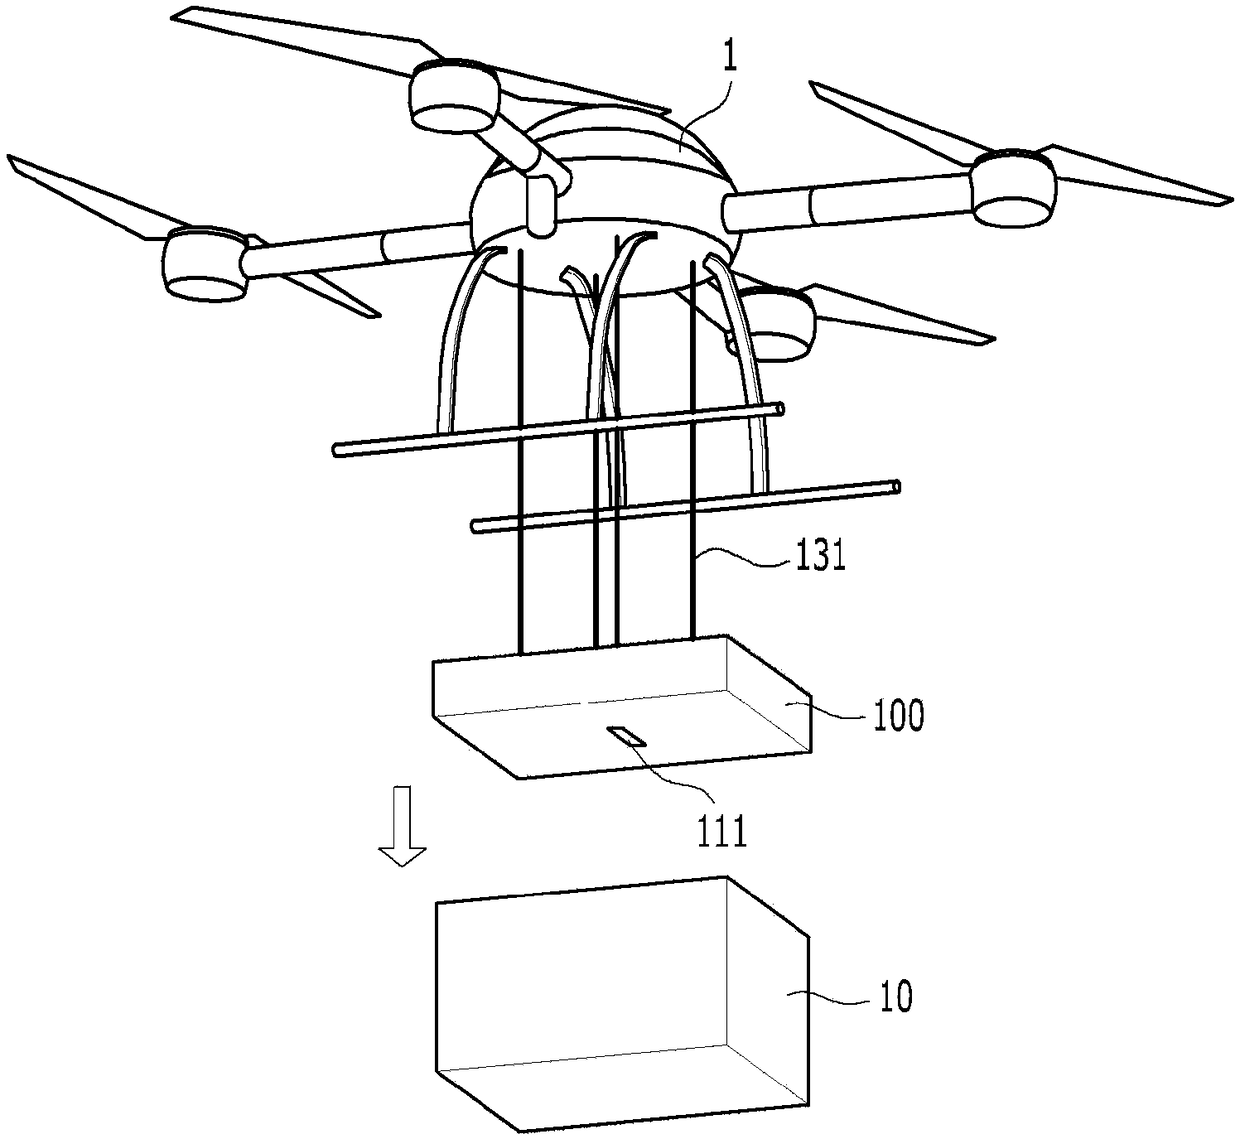 Flight unit-based freight falling apparatus and system using the same